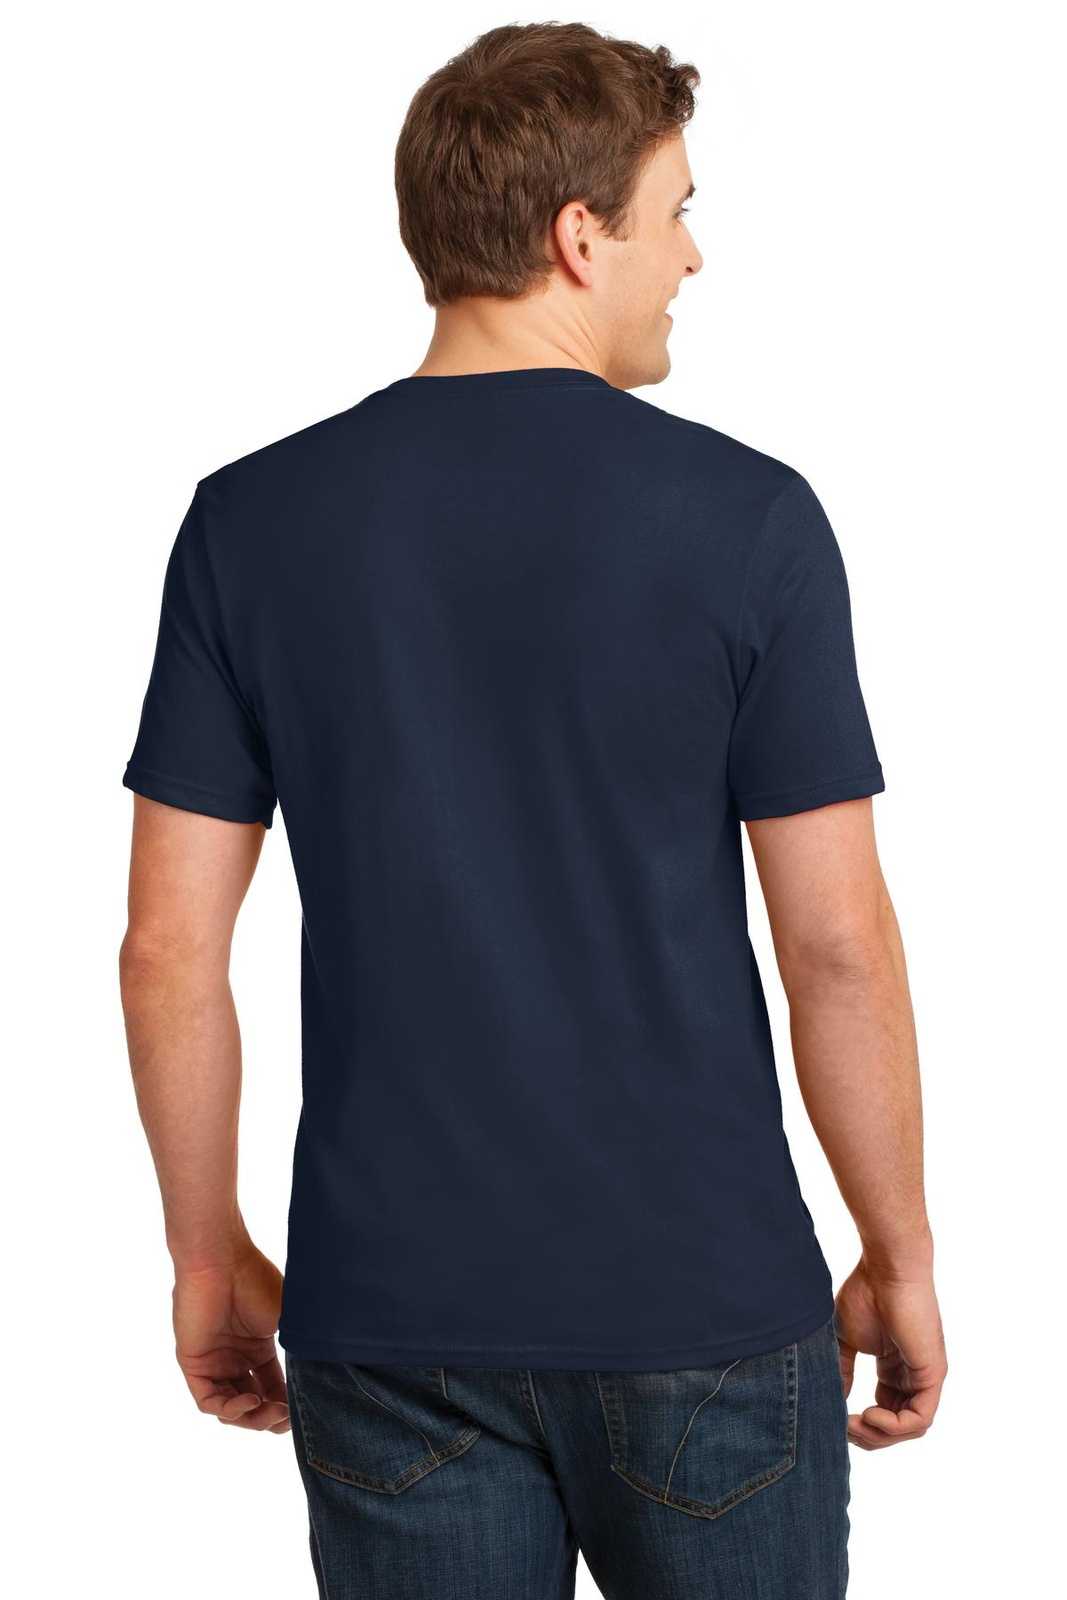 Anvil A982 100% Combed Ring Spun Cotton V-Neck T-Shirt - Navy - HIT a Double